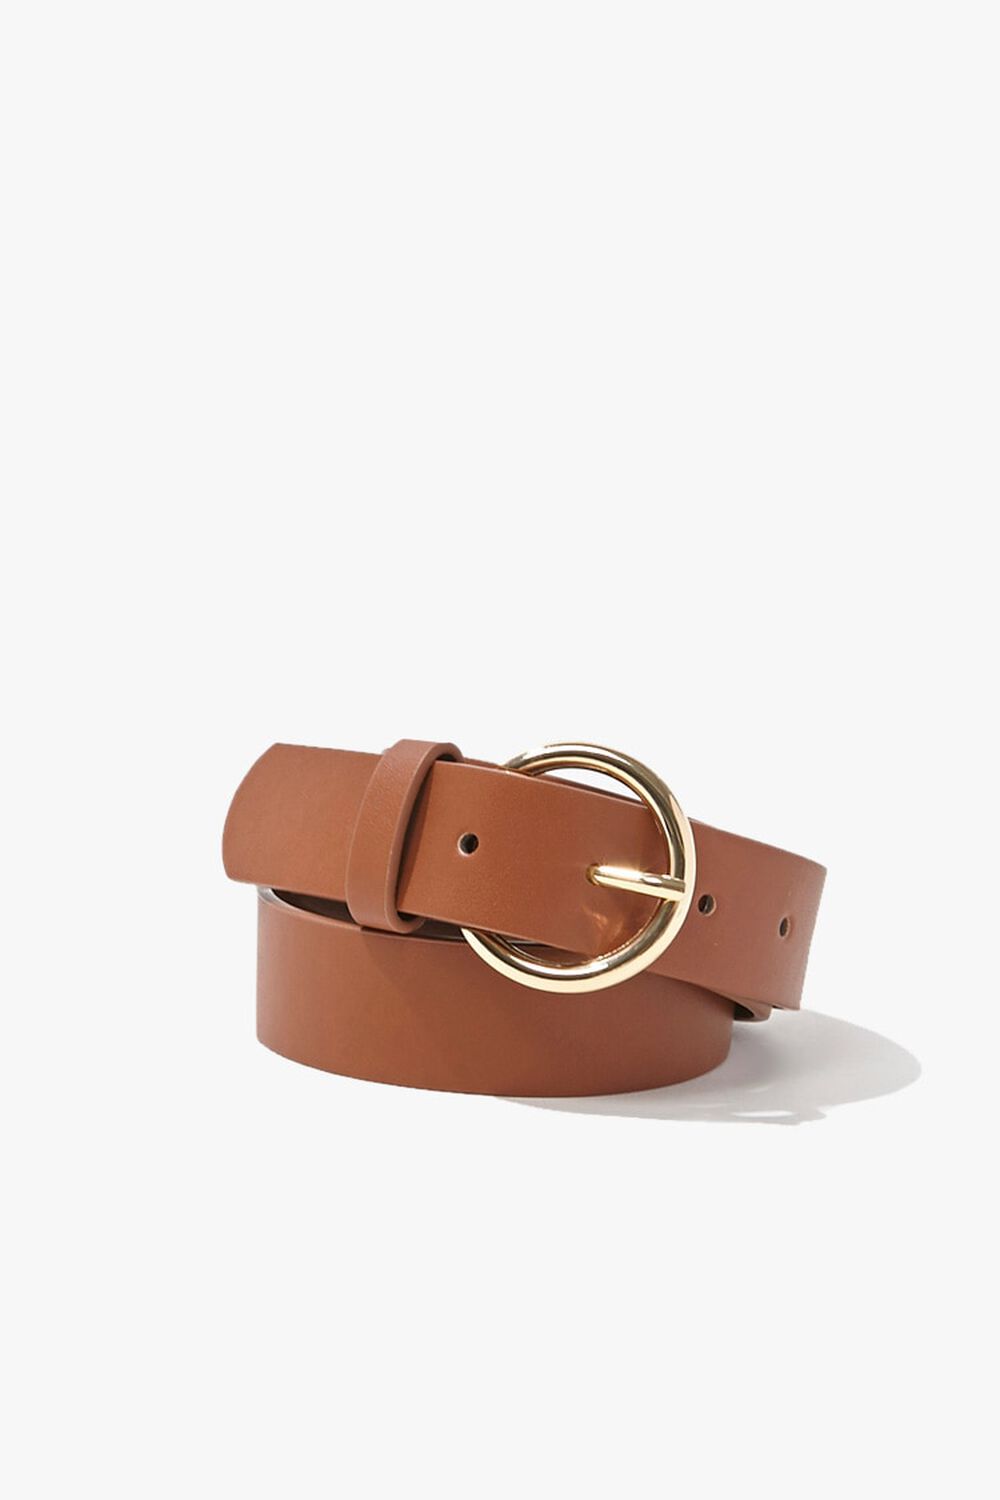 BROWN/GOLD Faux Leather Hip Belt, image 1